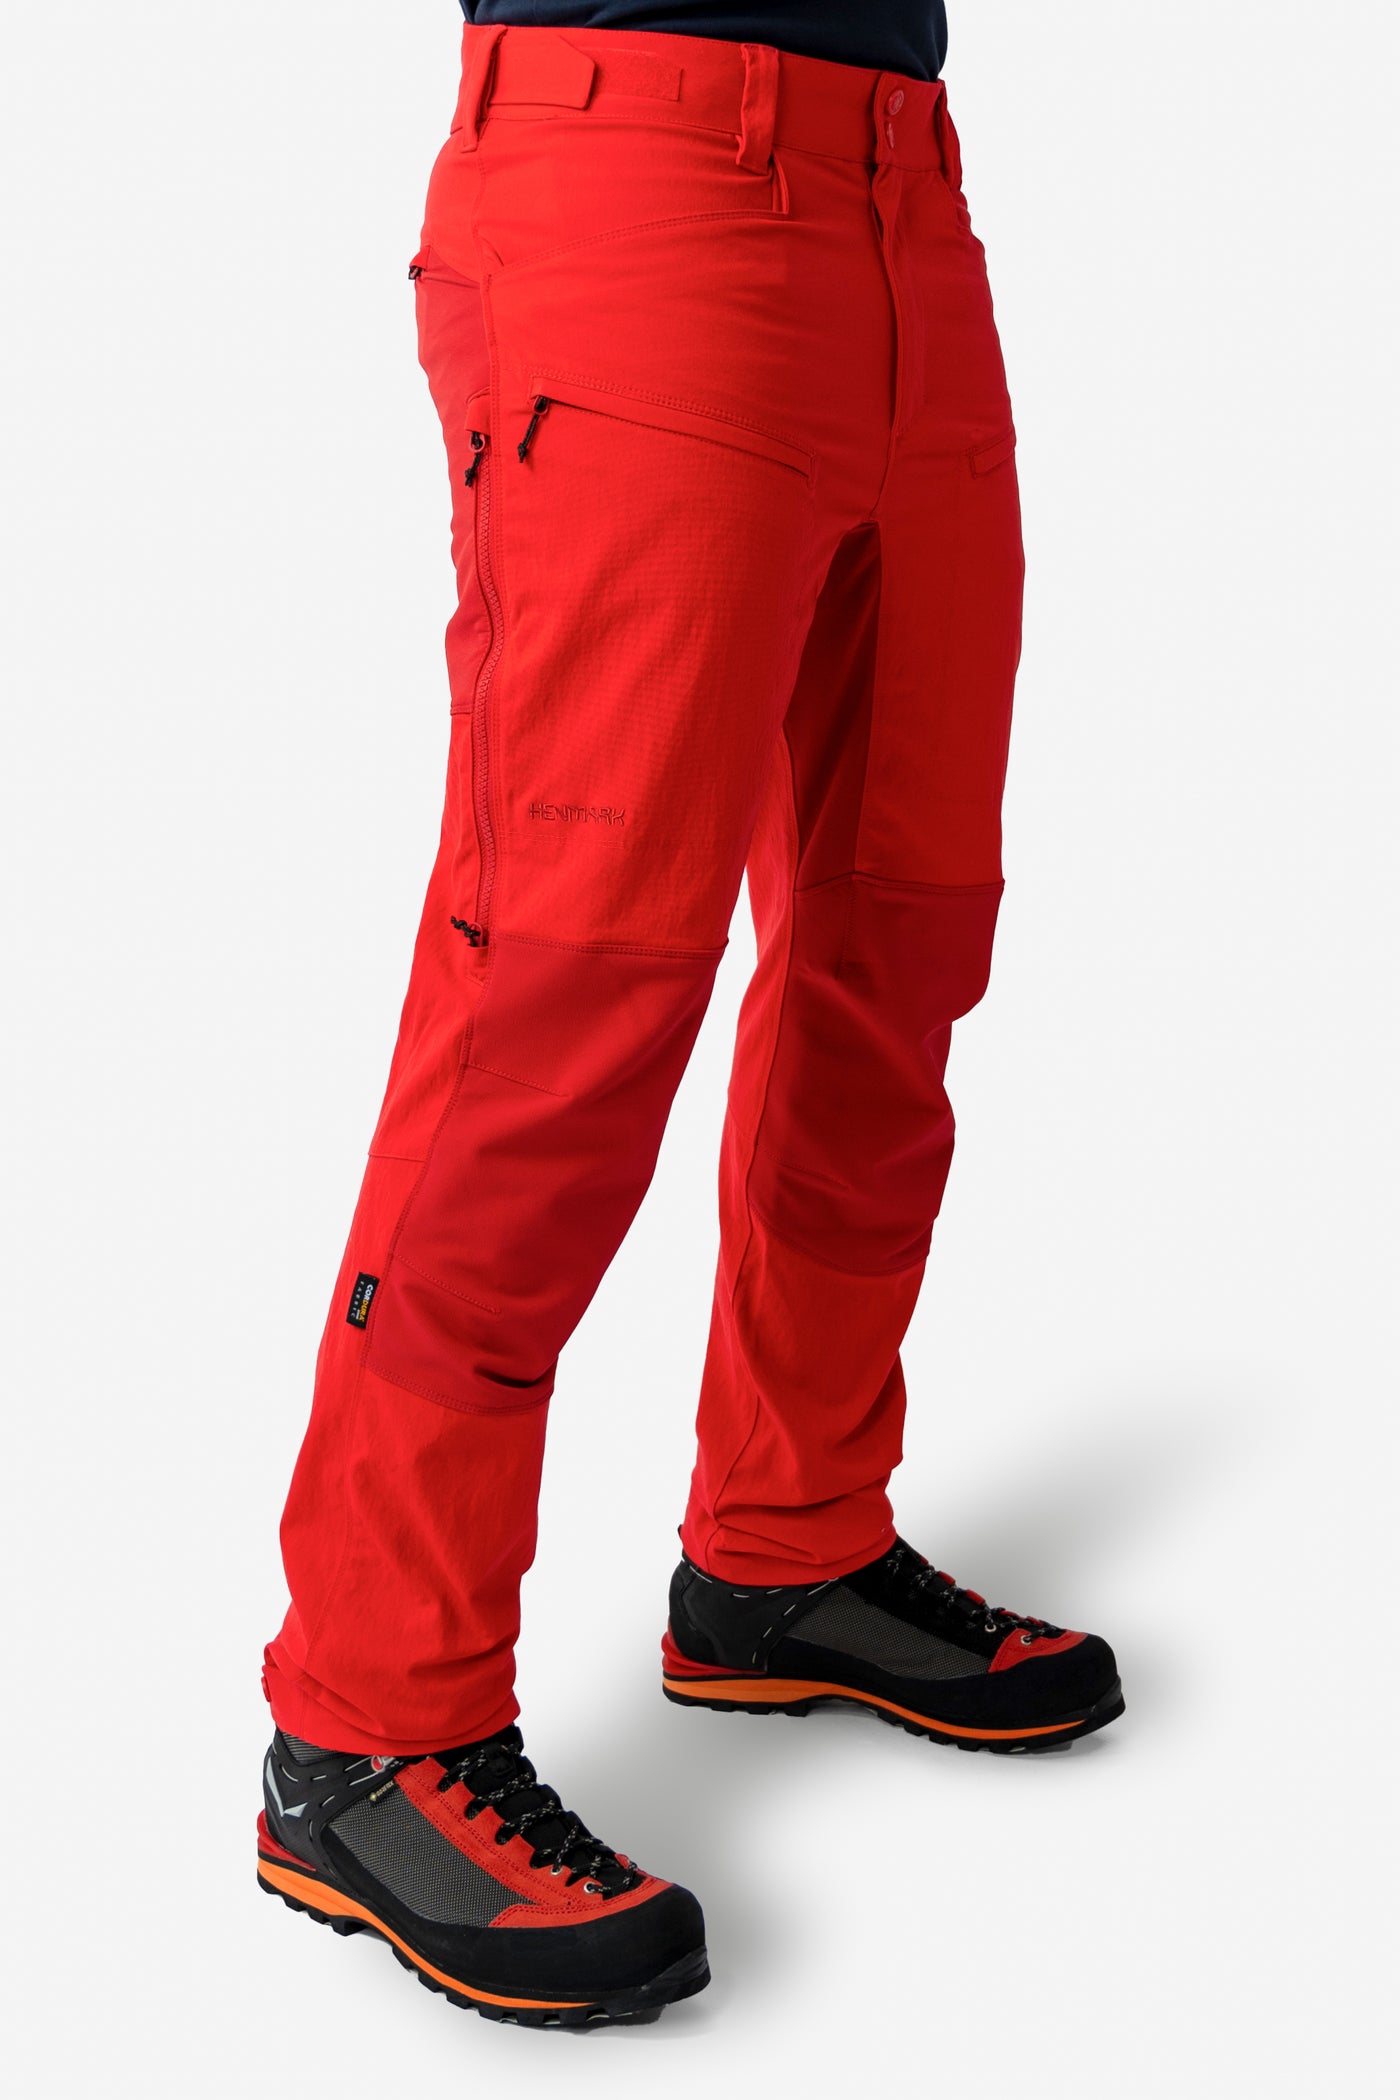 Henmark Hiking Pants M Protean Pant Red/Dark Red 28 